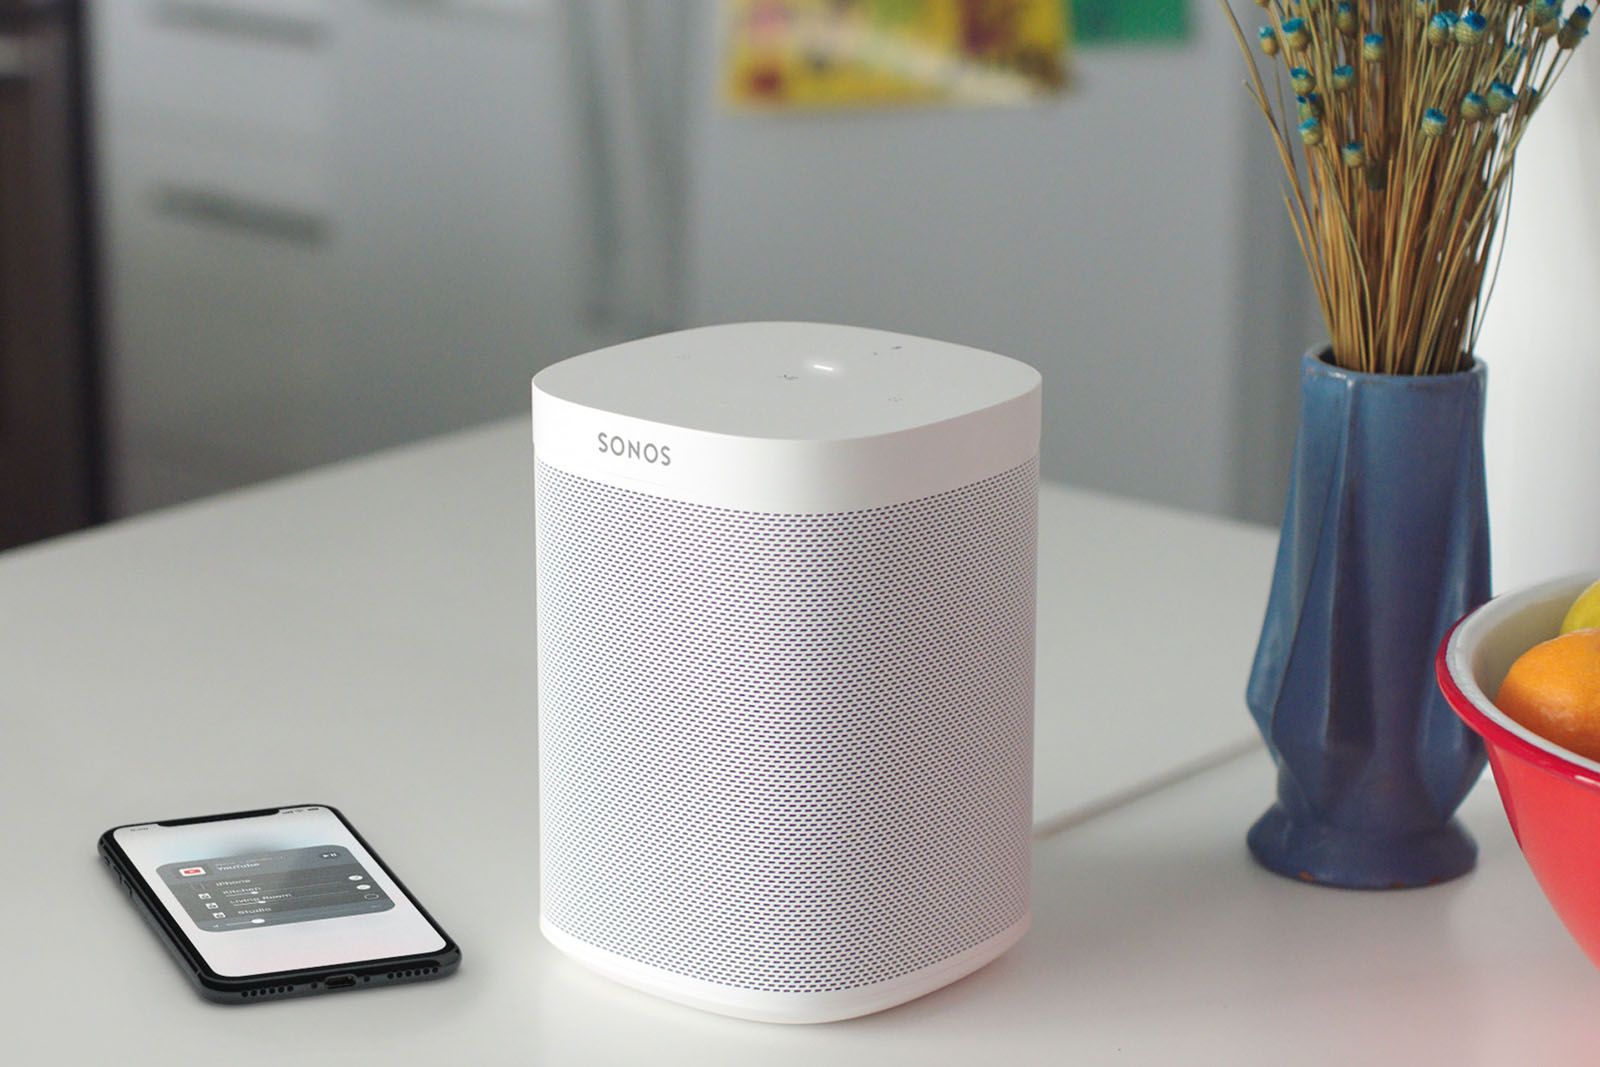 AirPlay 2 is now available on Sonos speakers via software update image 1